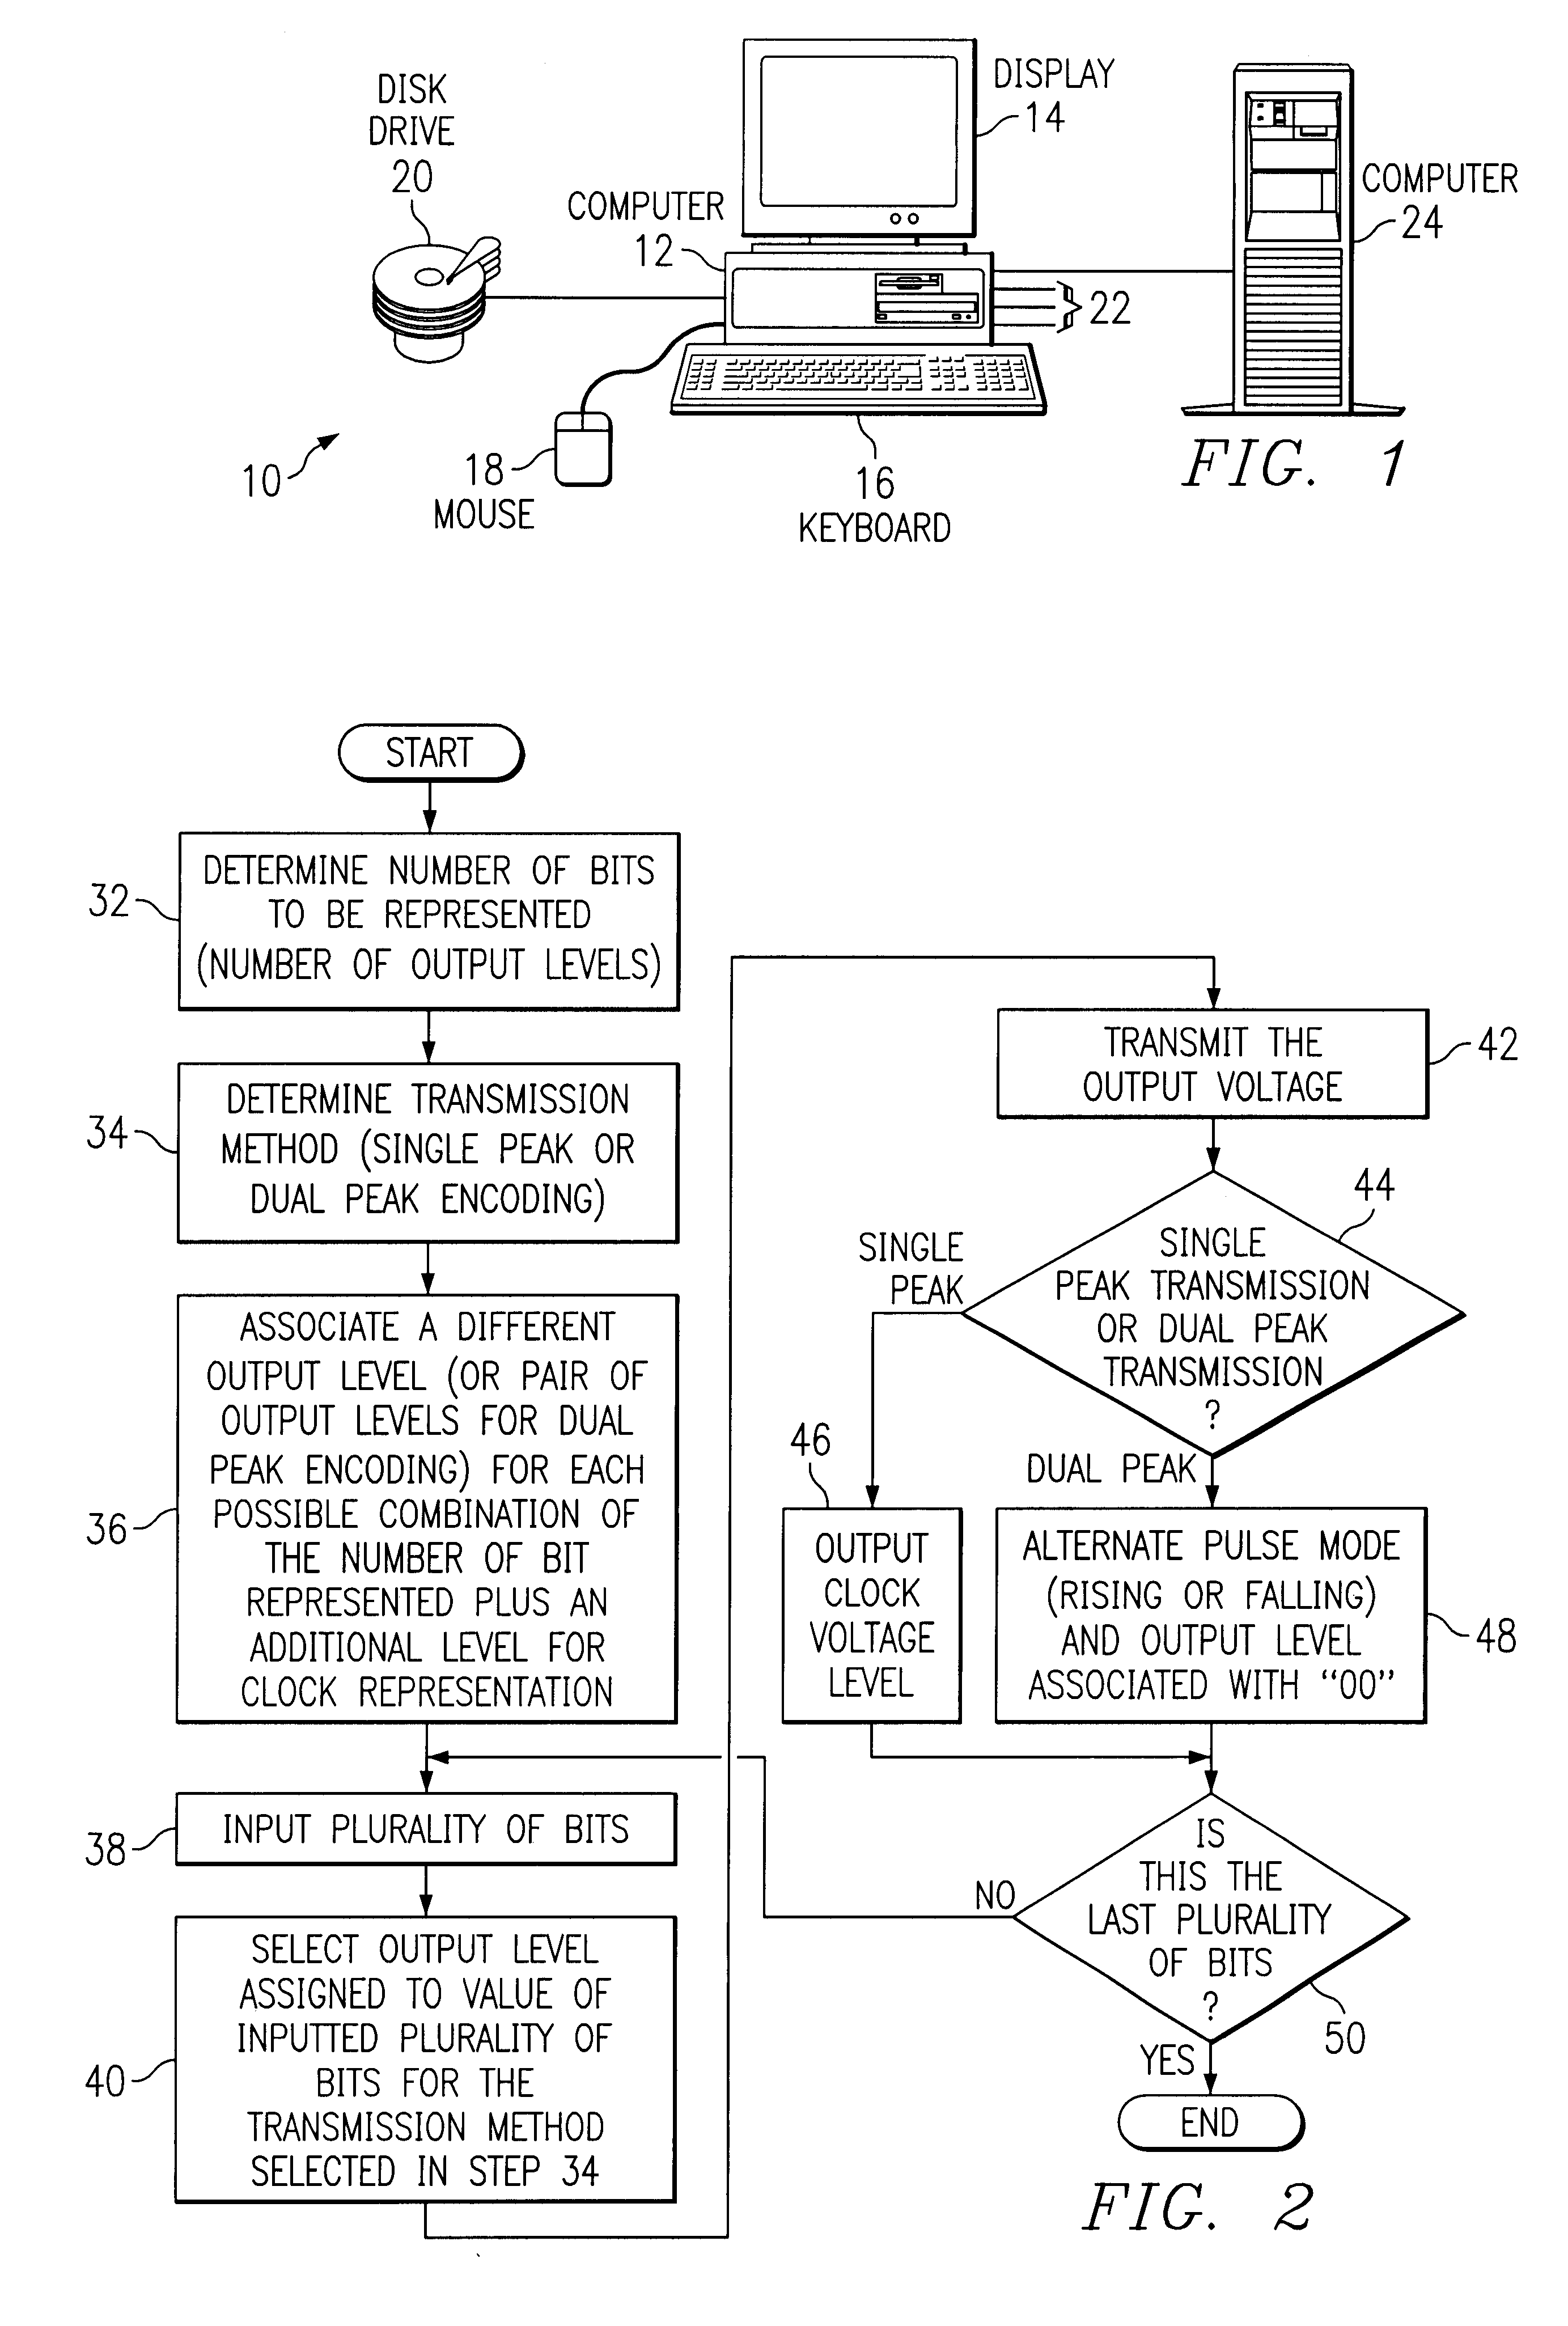 Method and apparatus for utilizing a data processing system for multi-level data communications providing self-clocking